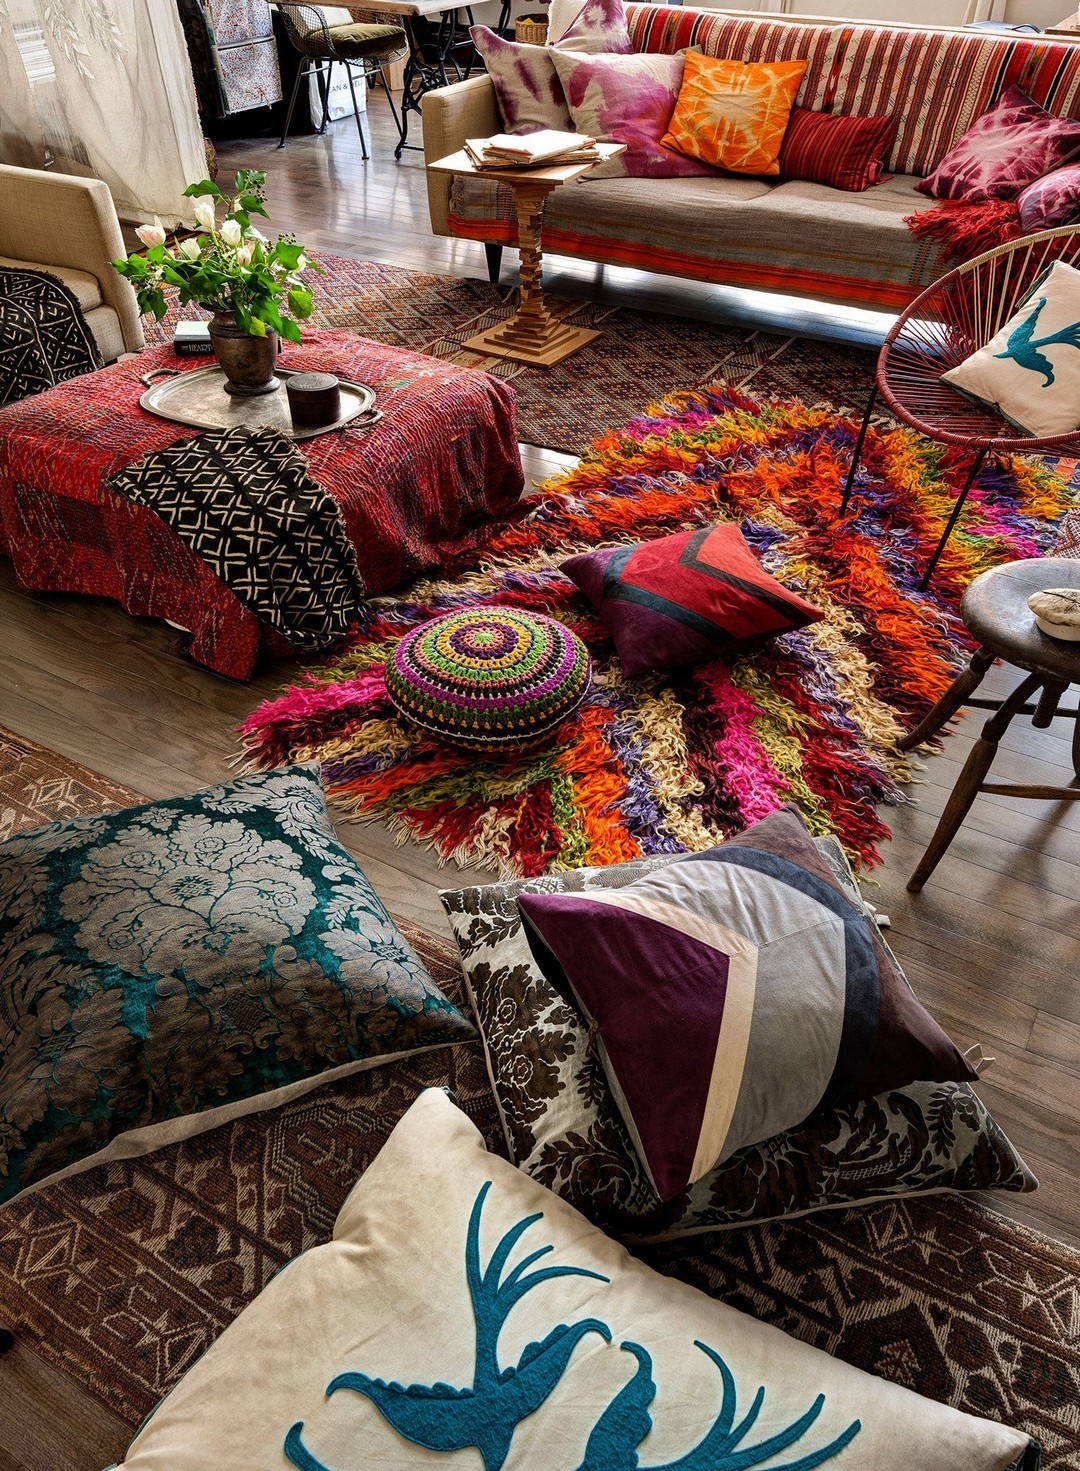 STUNNING WAYS TO DECORATE THE PERFECT BOHEMIAN LIVING ROOM 0